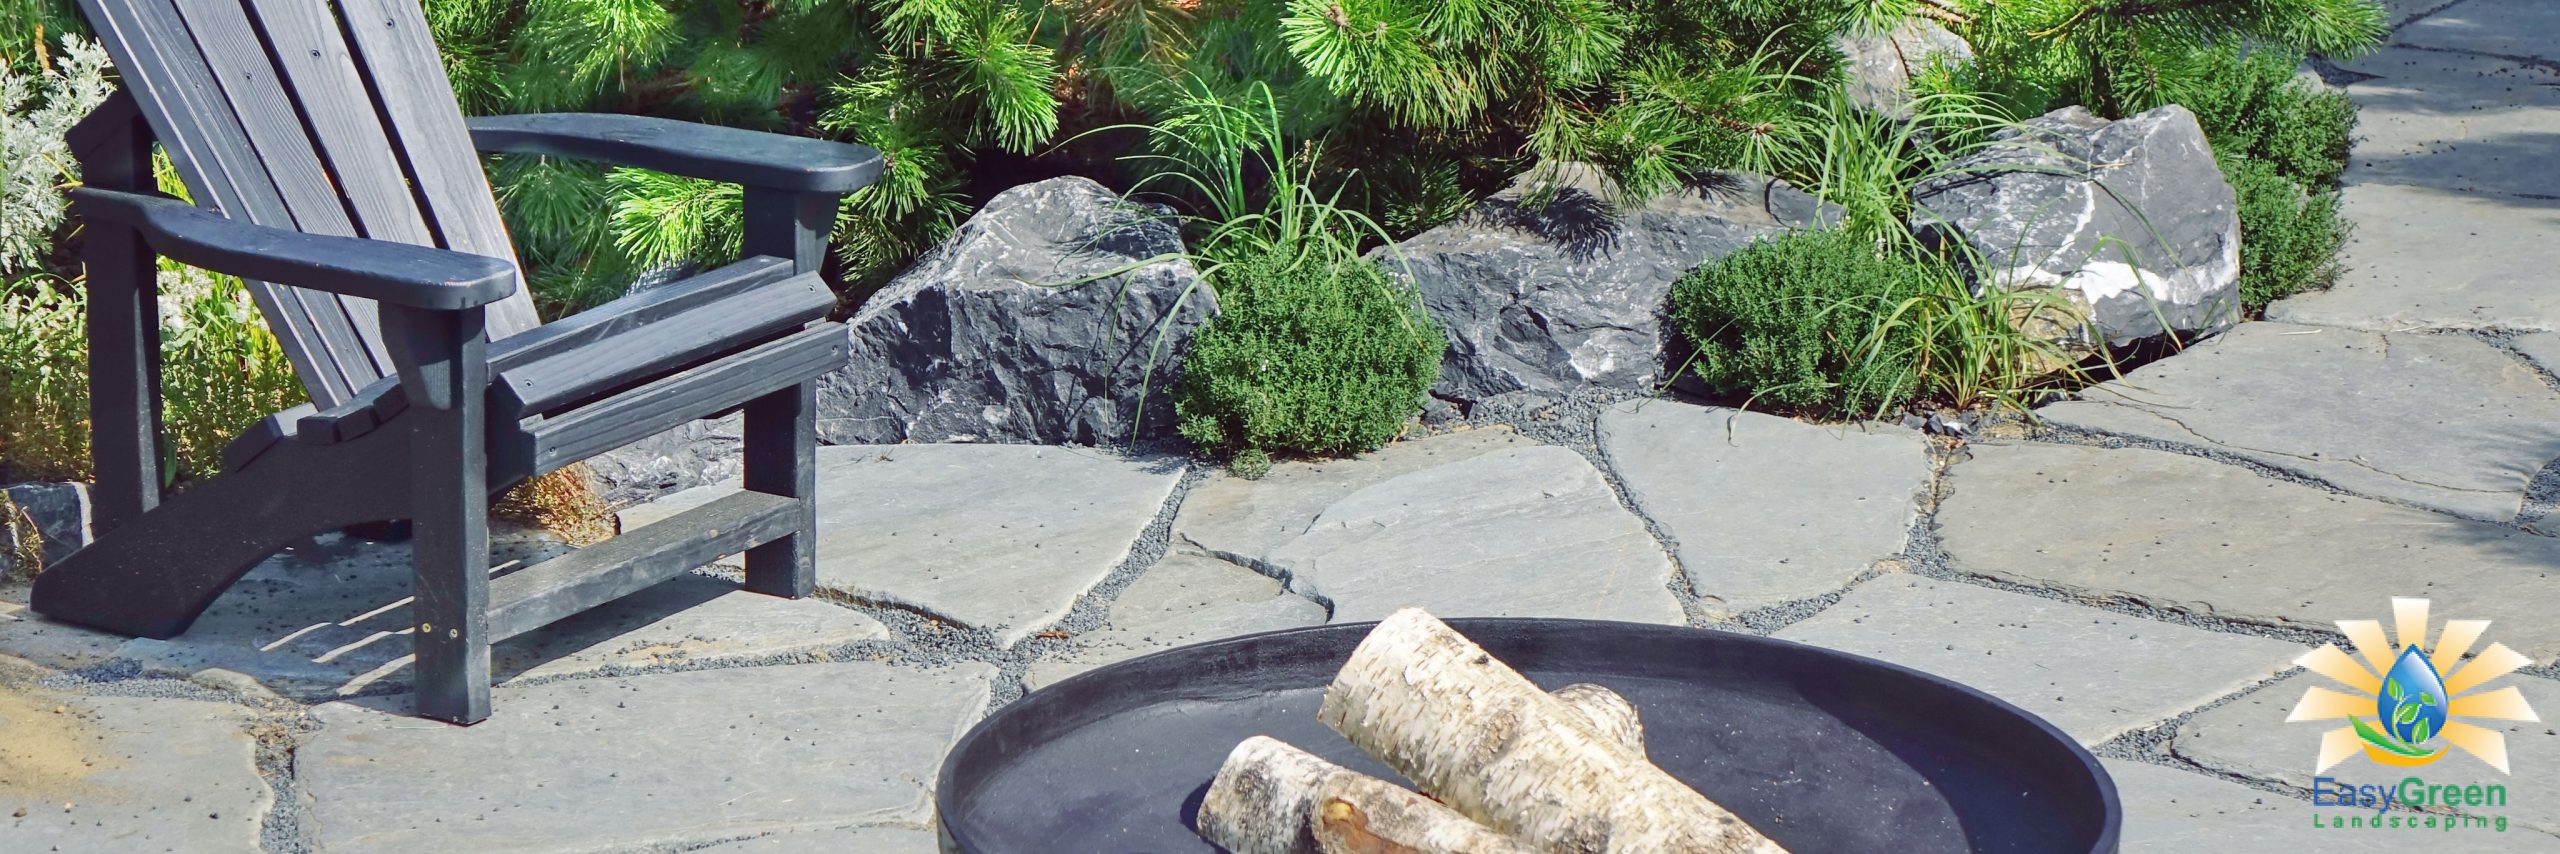 Planning Your Beautiful Flagstone Paver Installation Project